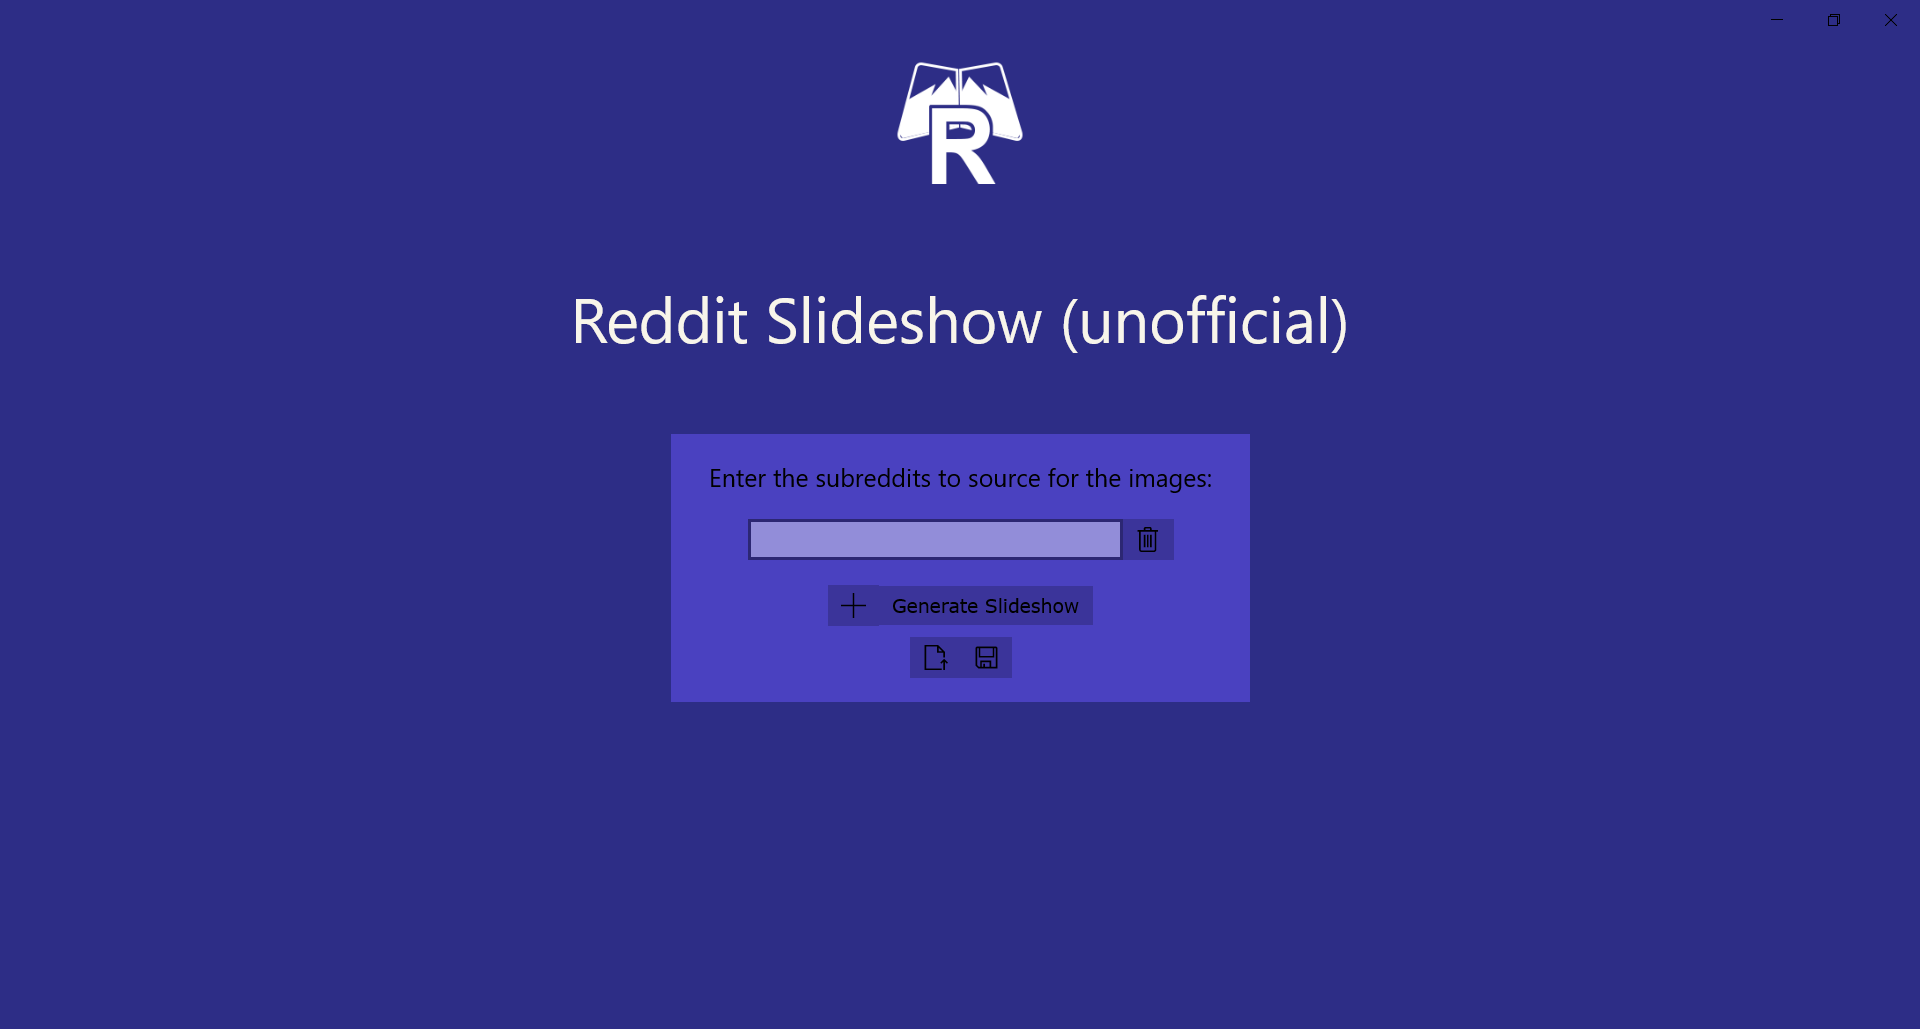 Add as many subreddits as you want! Also save and load your subreddit lists to text files.